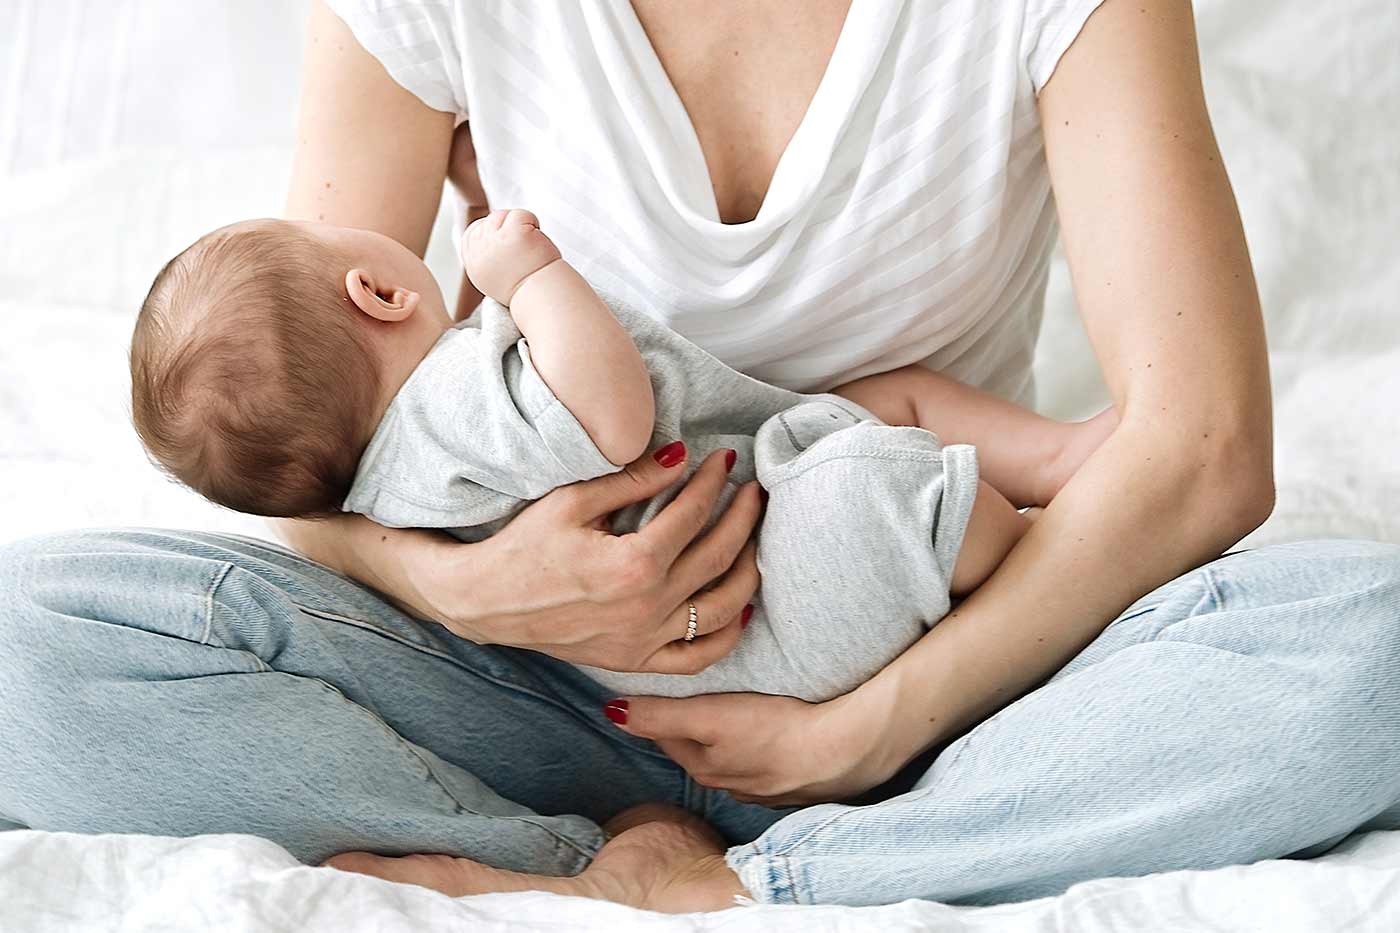 When Does Breastfeeding Stop Hurting